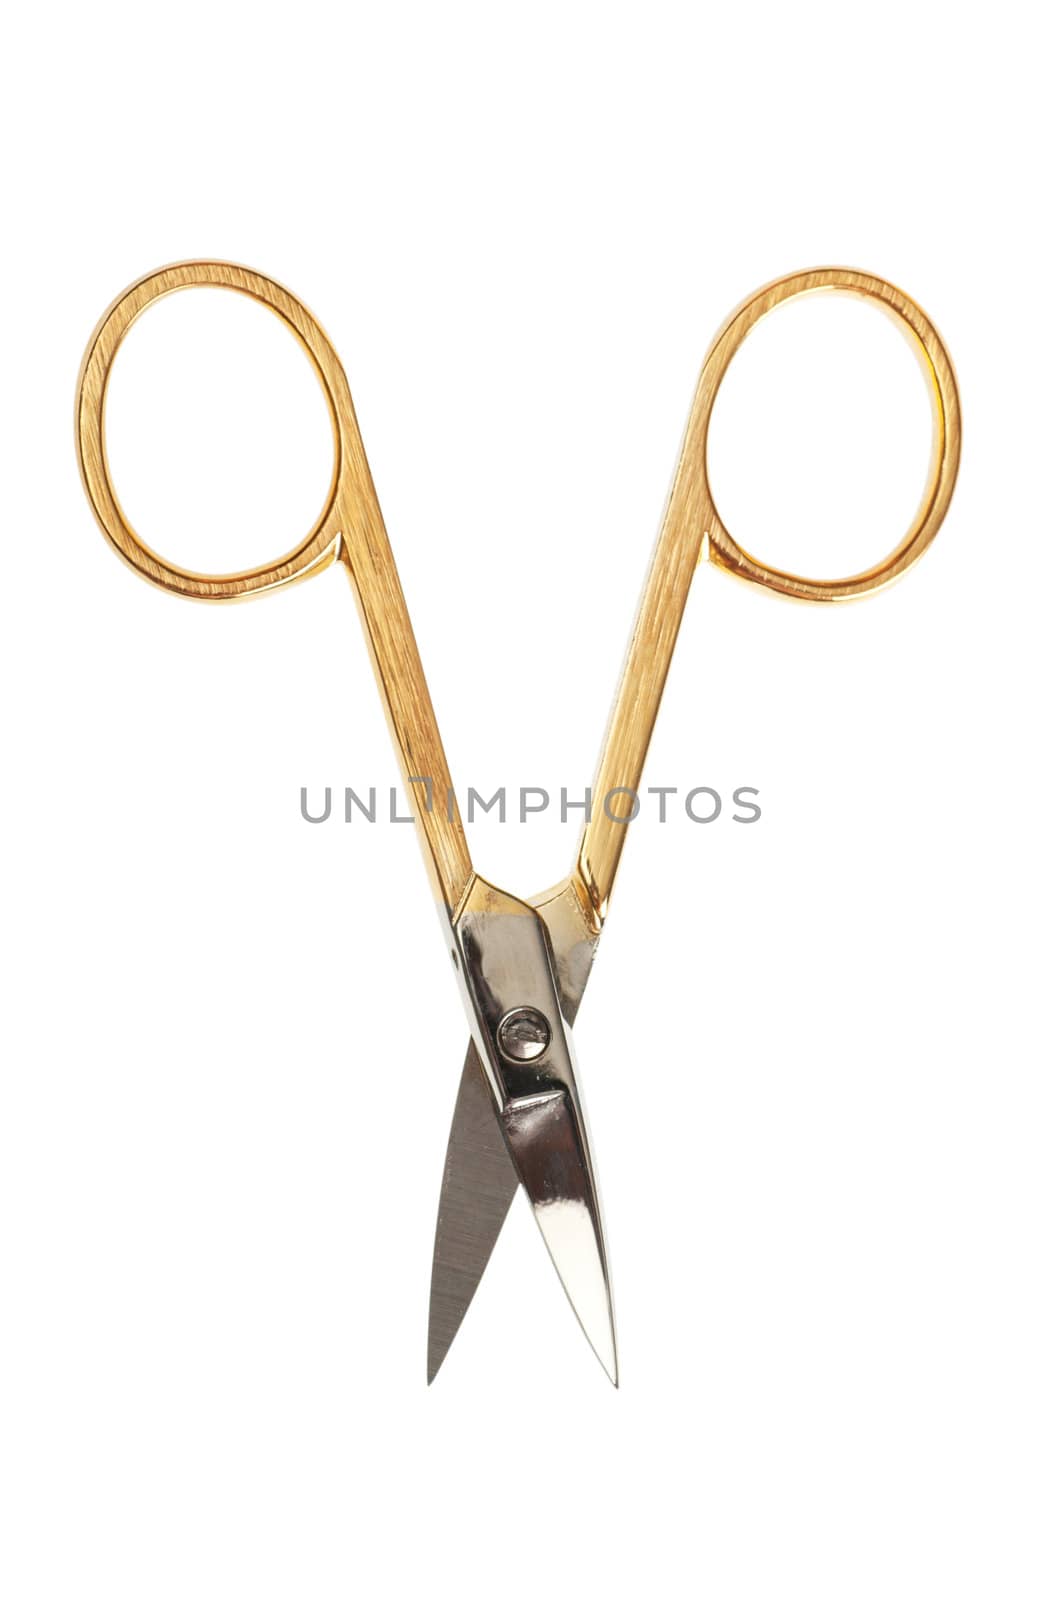 Manicure scissors with golden color handles isolated over the white